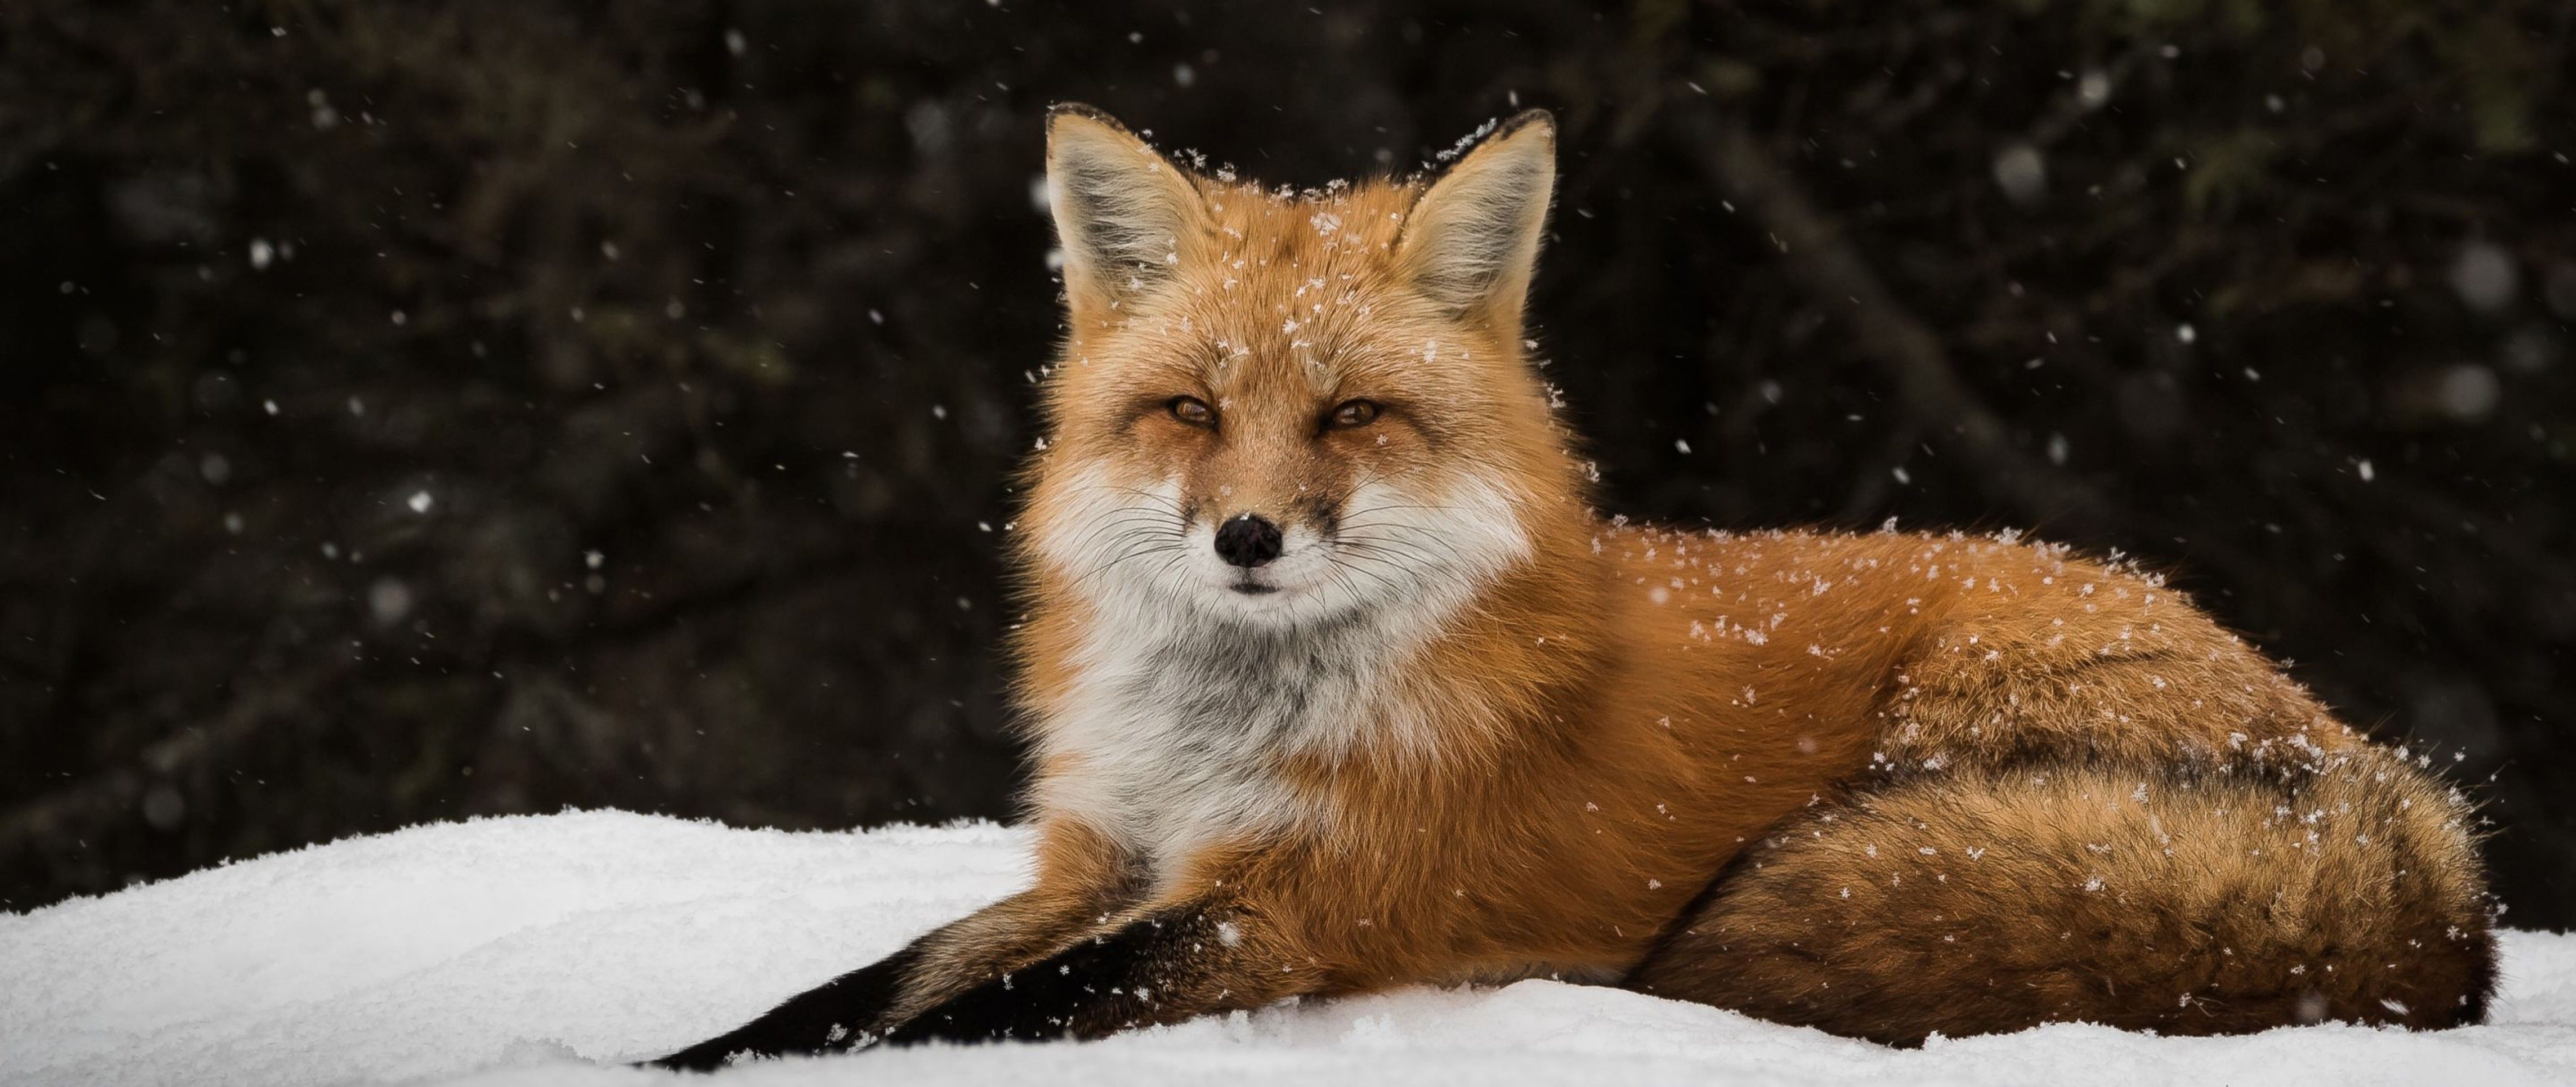 Fox Snow Forest Wallpaper for Desktop and Mobiles 4K Ultra HD Wide TV